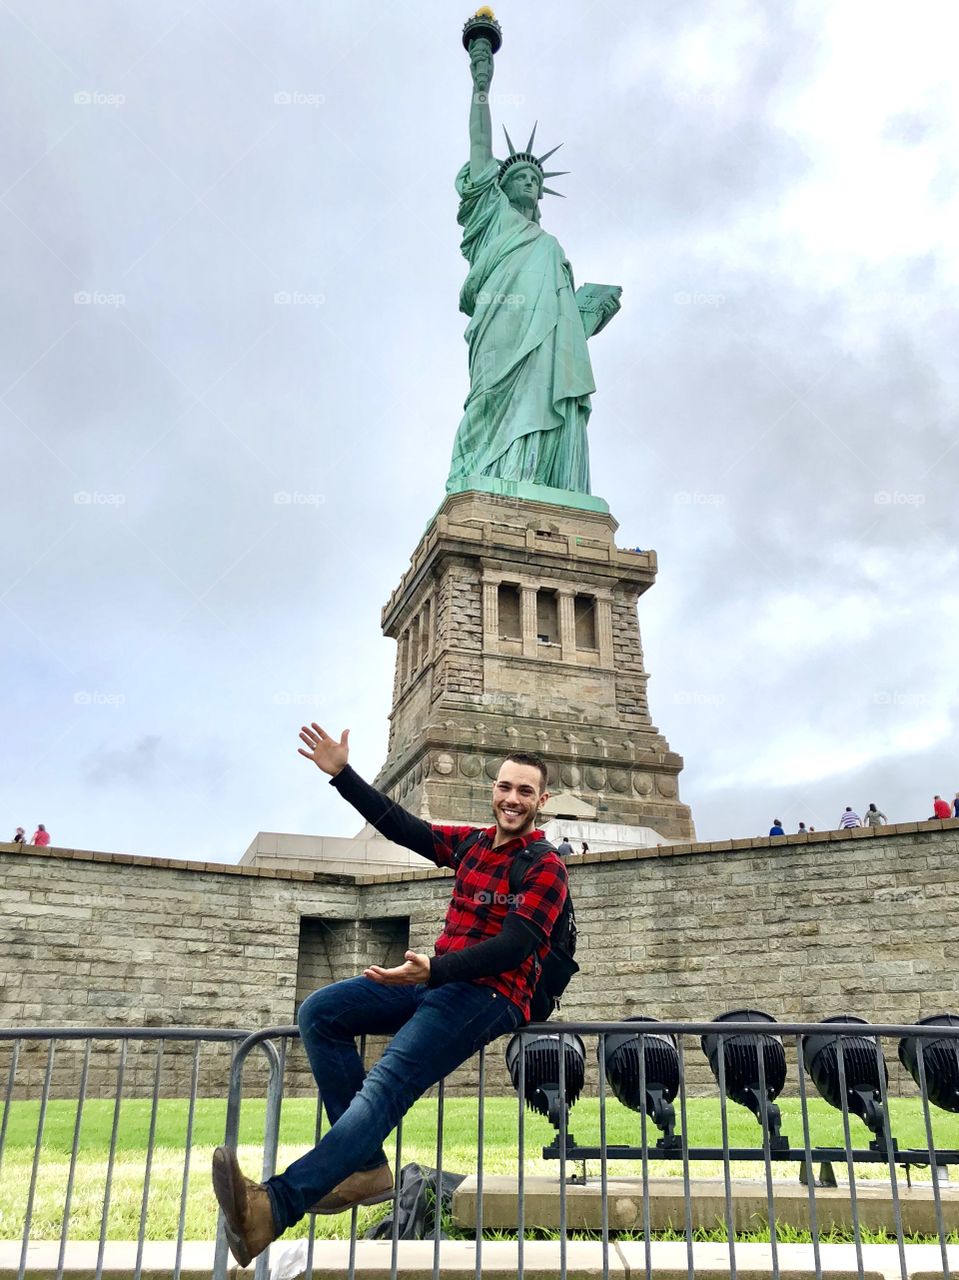 Celebrating this beautiful gift, the Statue of Liberty which was a symbol of freedom and hope to our ancestors, which resulted in giving me the opportunity to be the man I am today!  